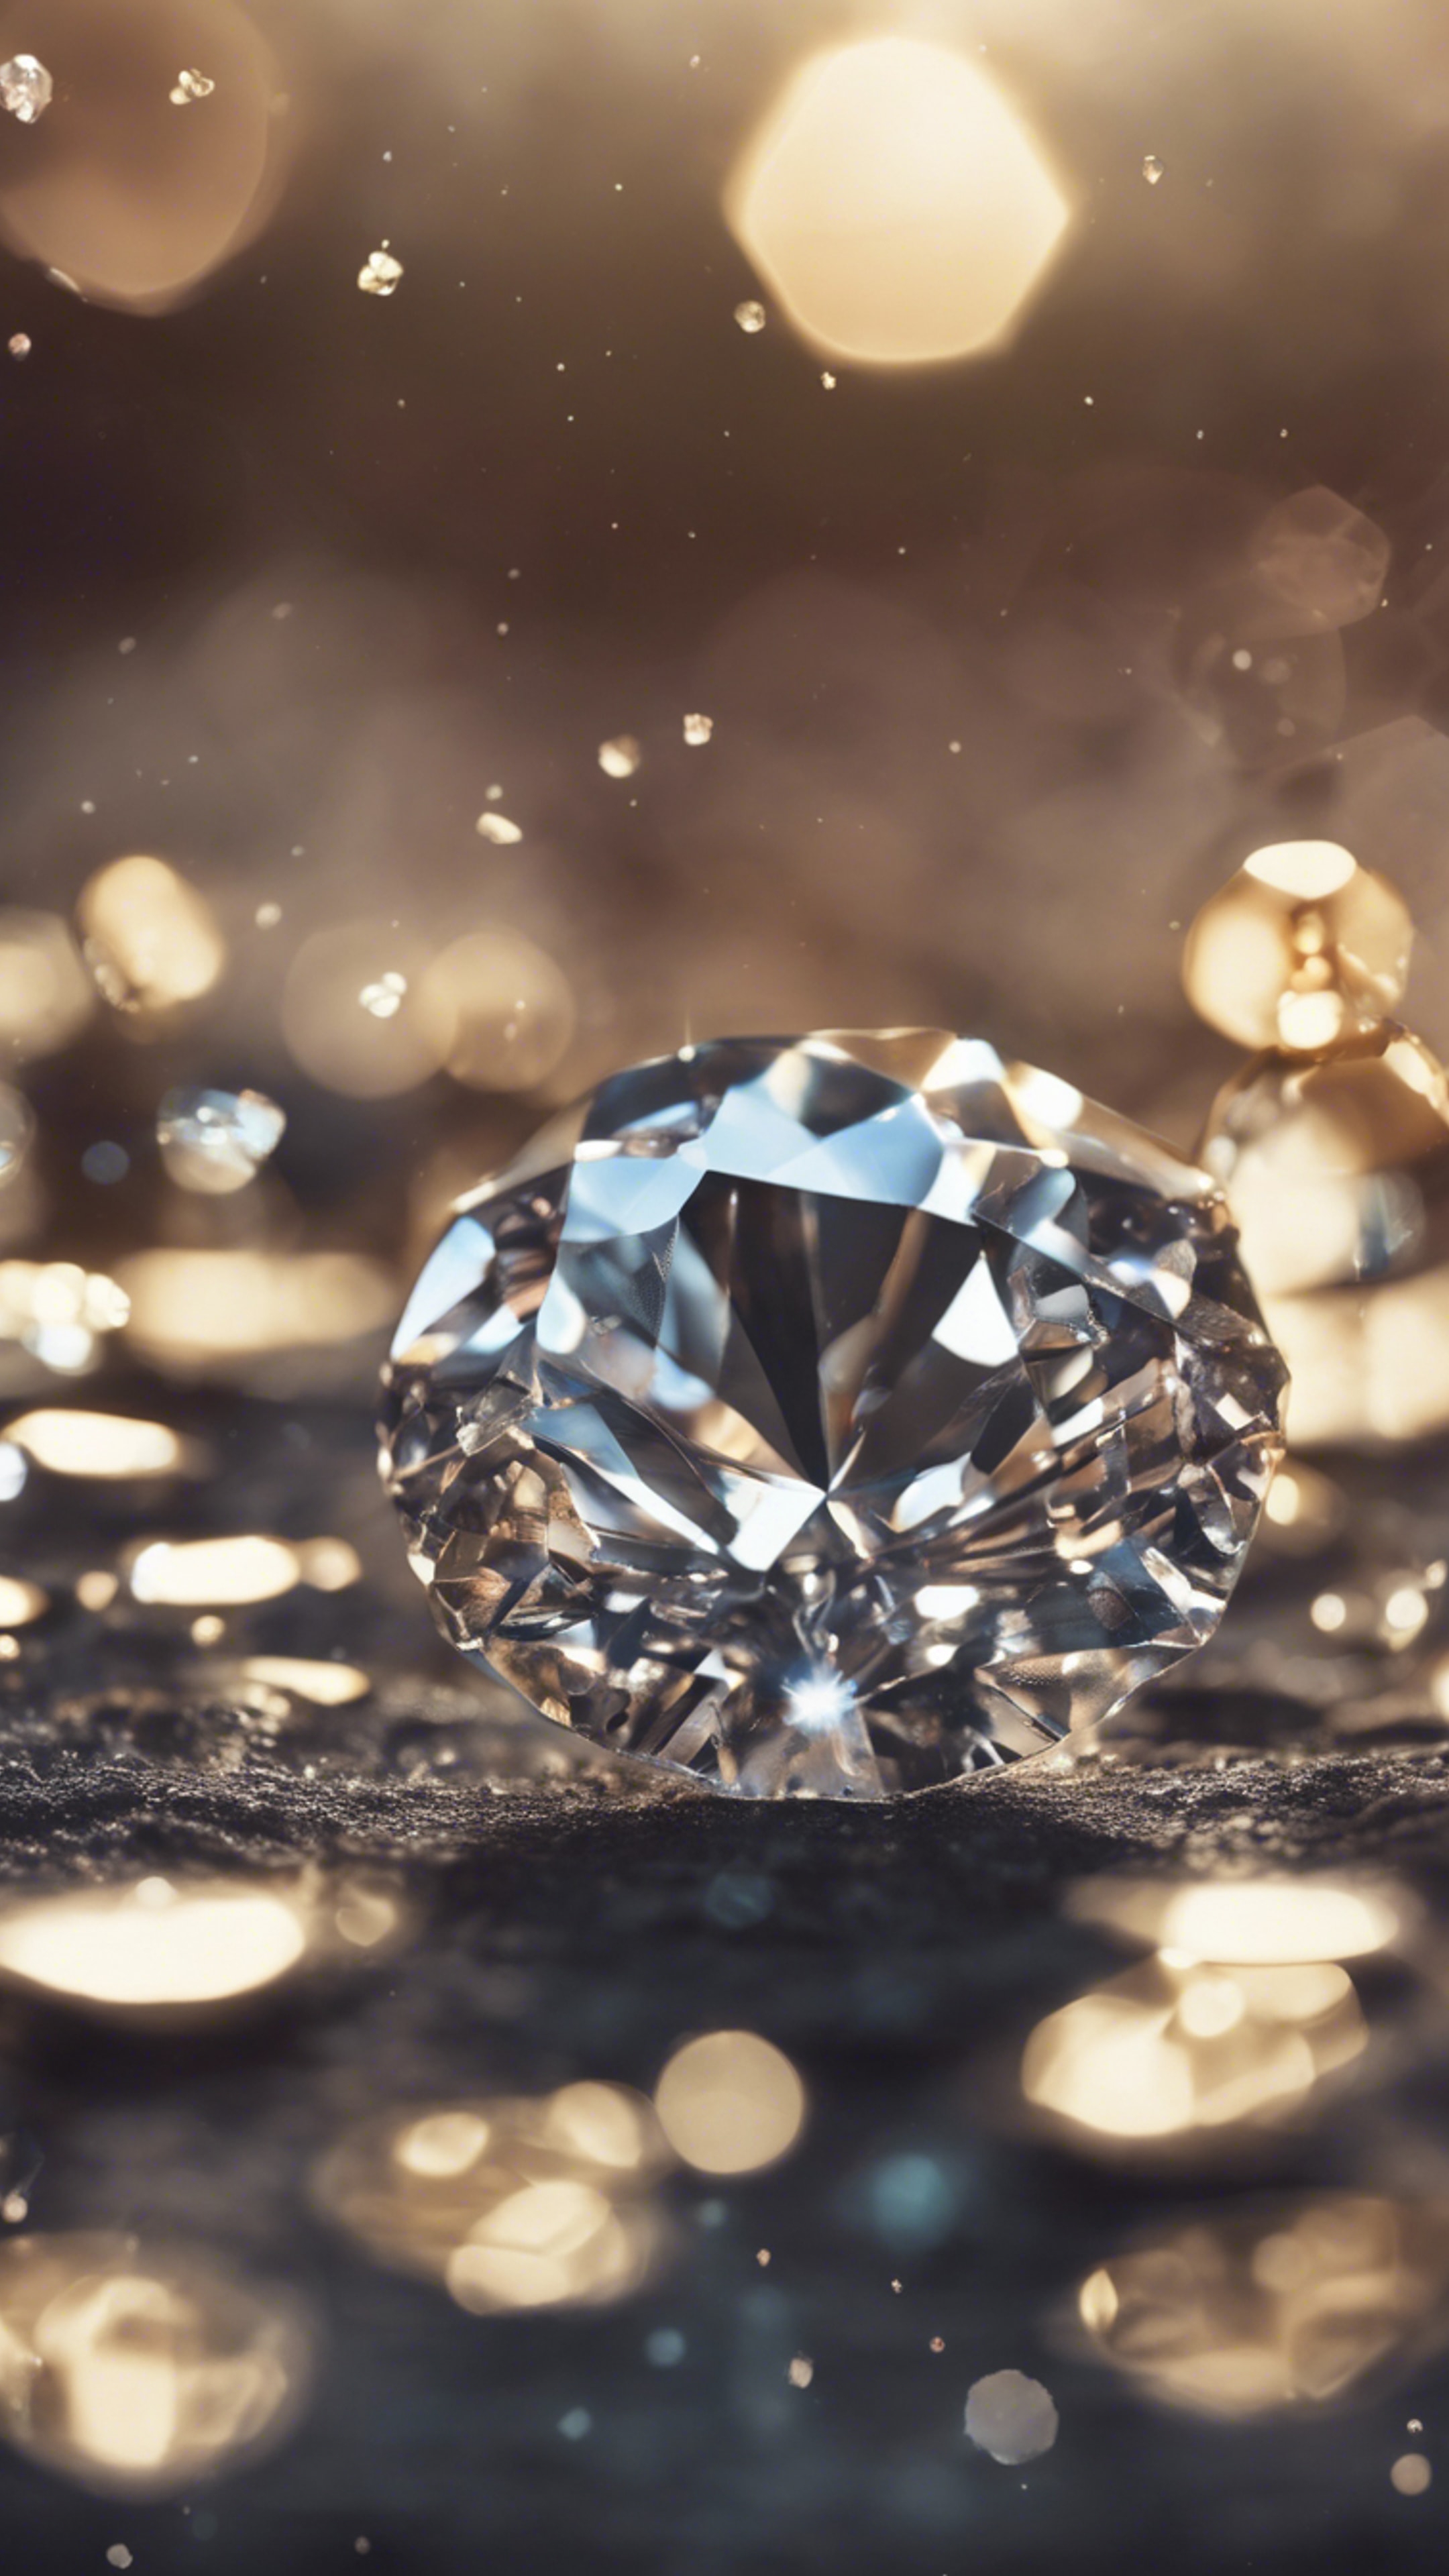 In the face of adversity, remember that diamonds are made under pressure and so are you.壁紙[2323702b52984c91b15b]